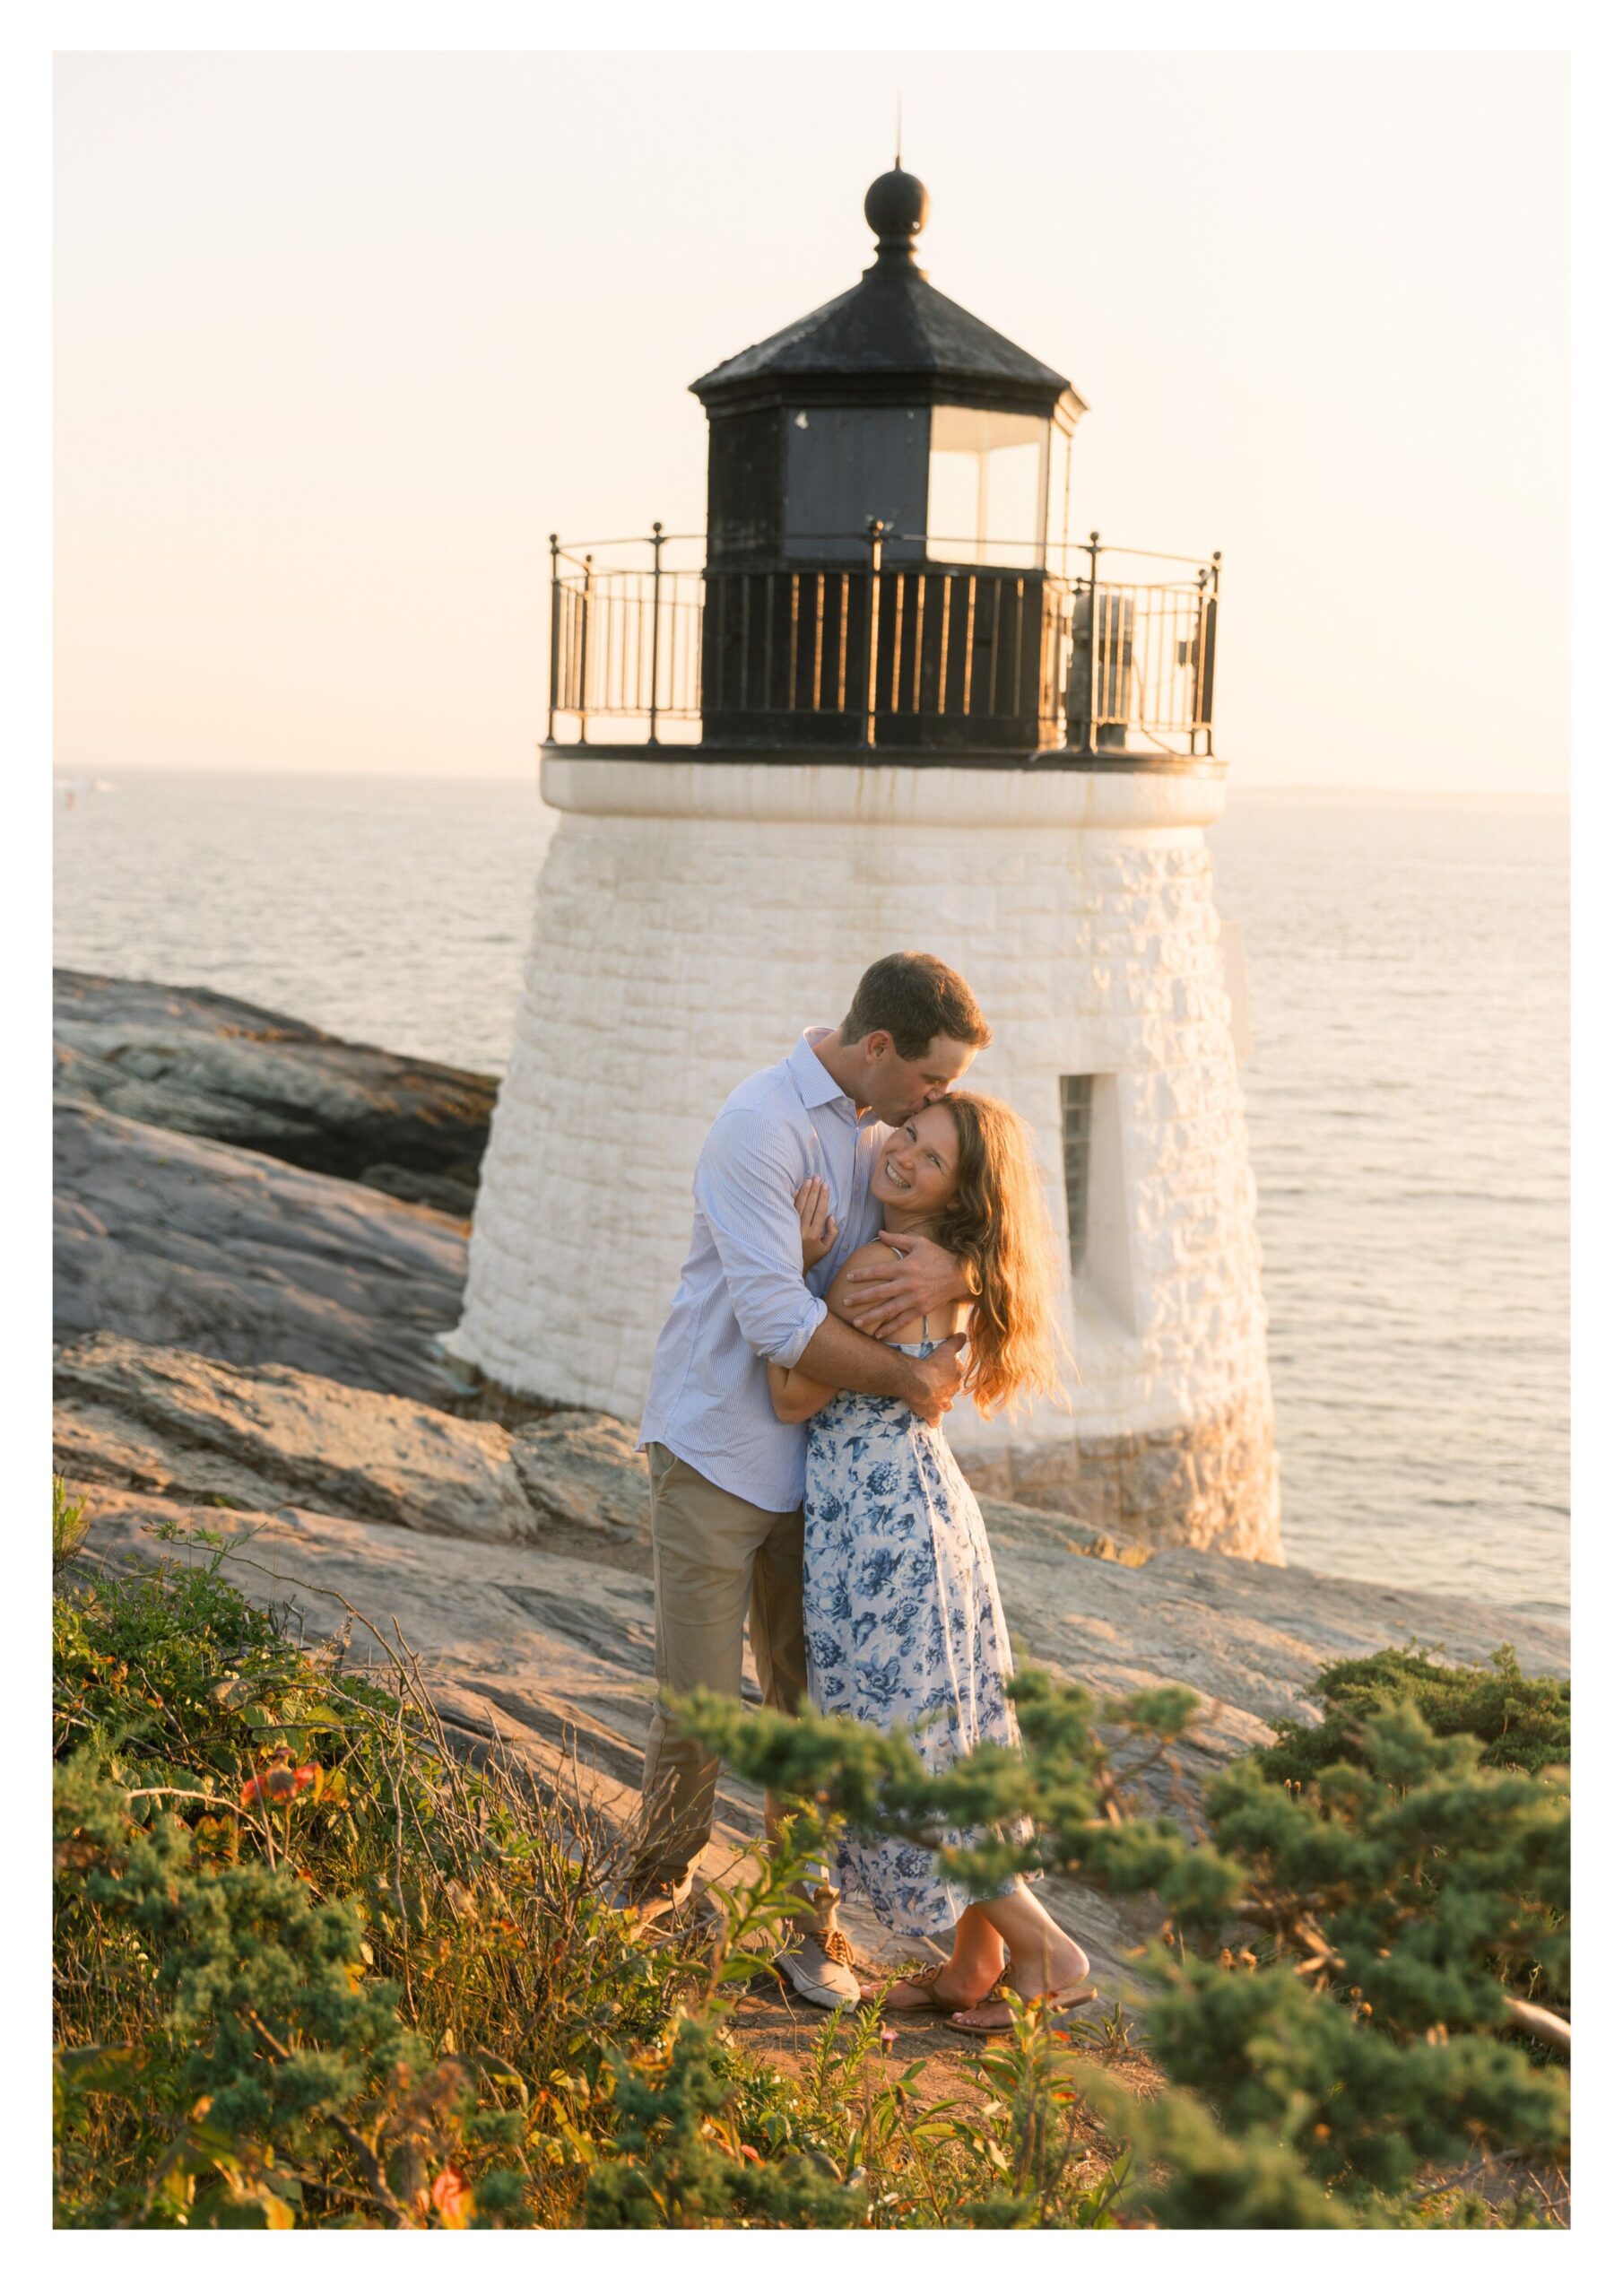 Castle Hill is one of the more opulent and beautiful venues serving engaged and newlywed couples that are looking to get married in Newport Rhode Island. The historical venue offers panoramic views of the water and is home to Newport Rhode Island's iconic Castle Hill Light House. 